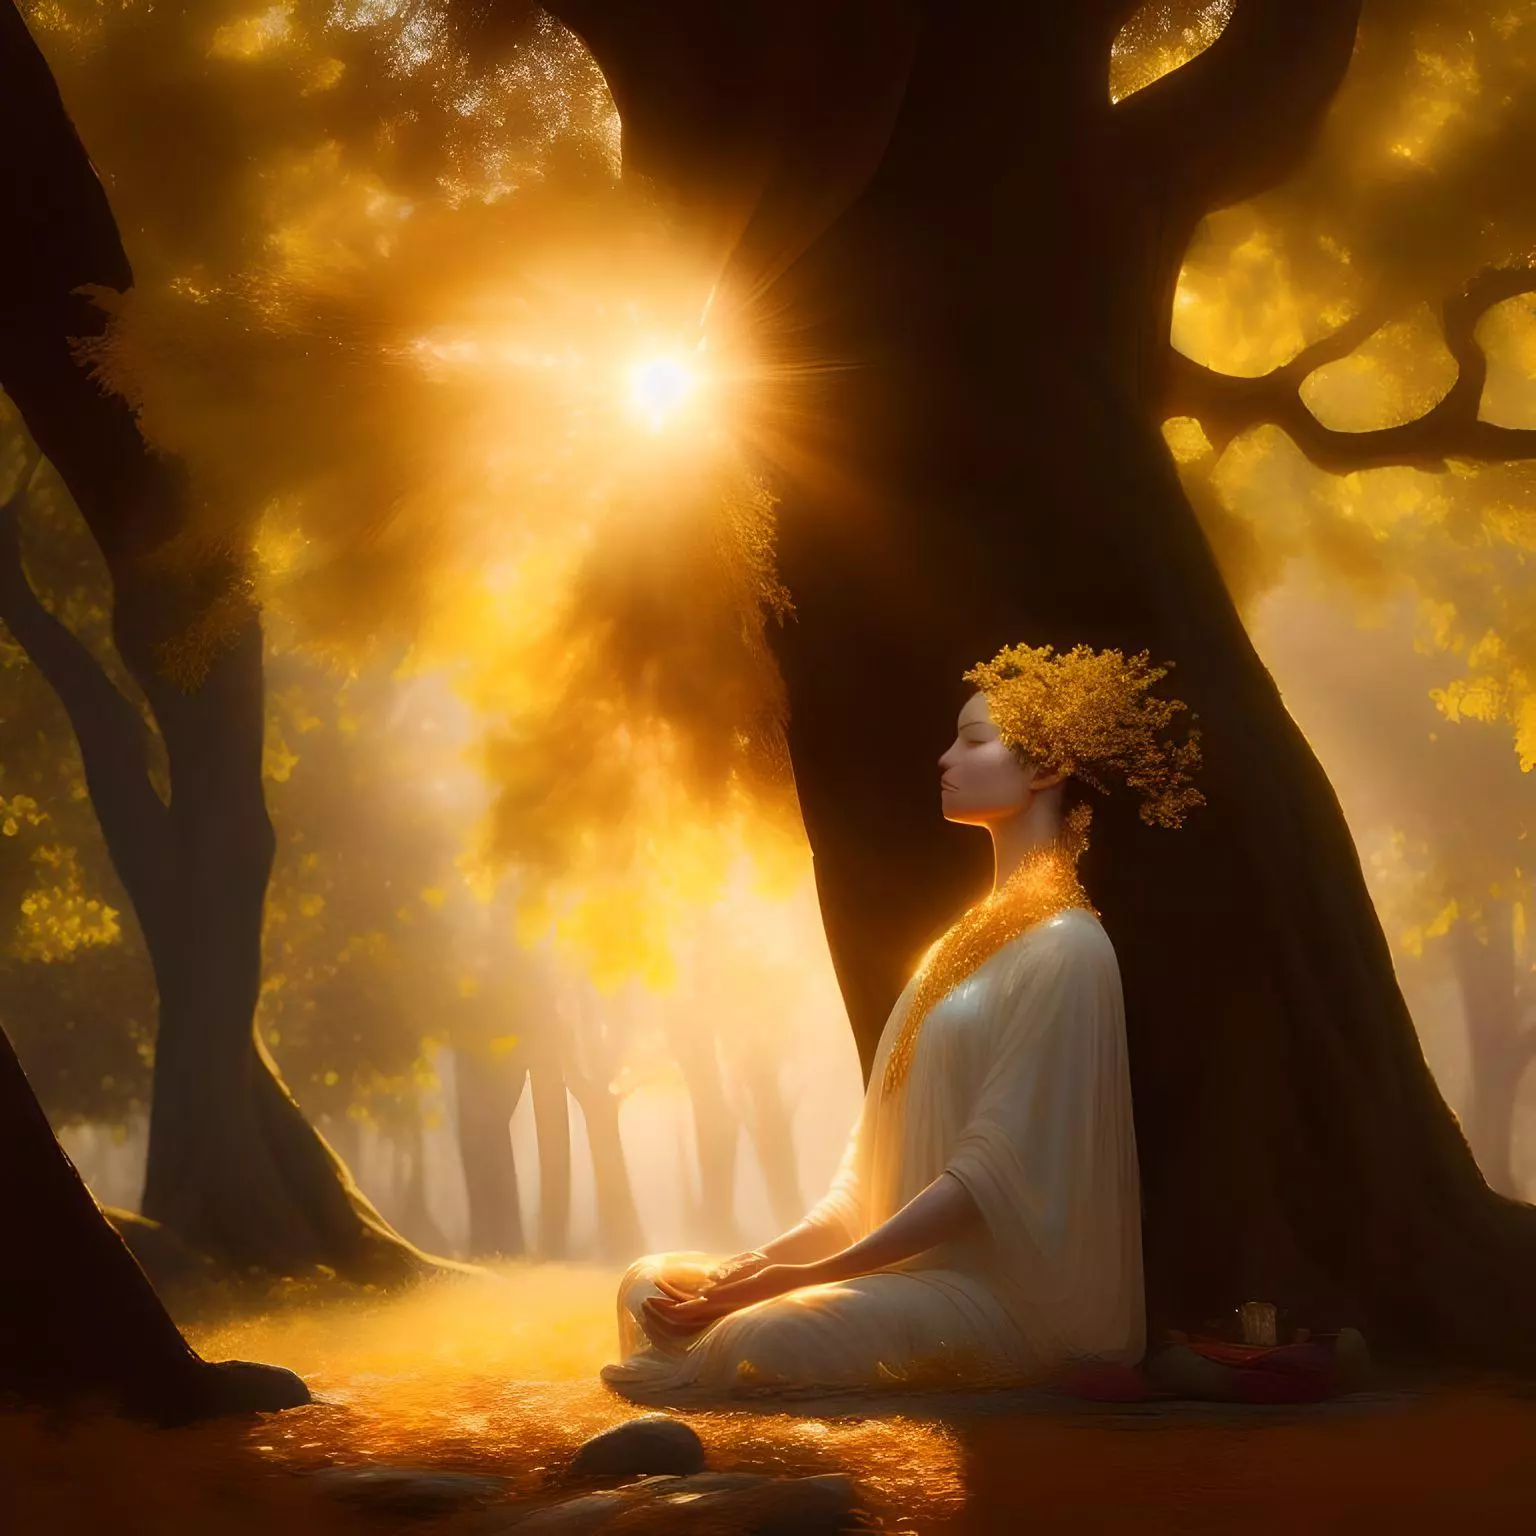 a woman in a white dress meditating under a tree with the sun casting through the leaves